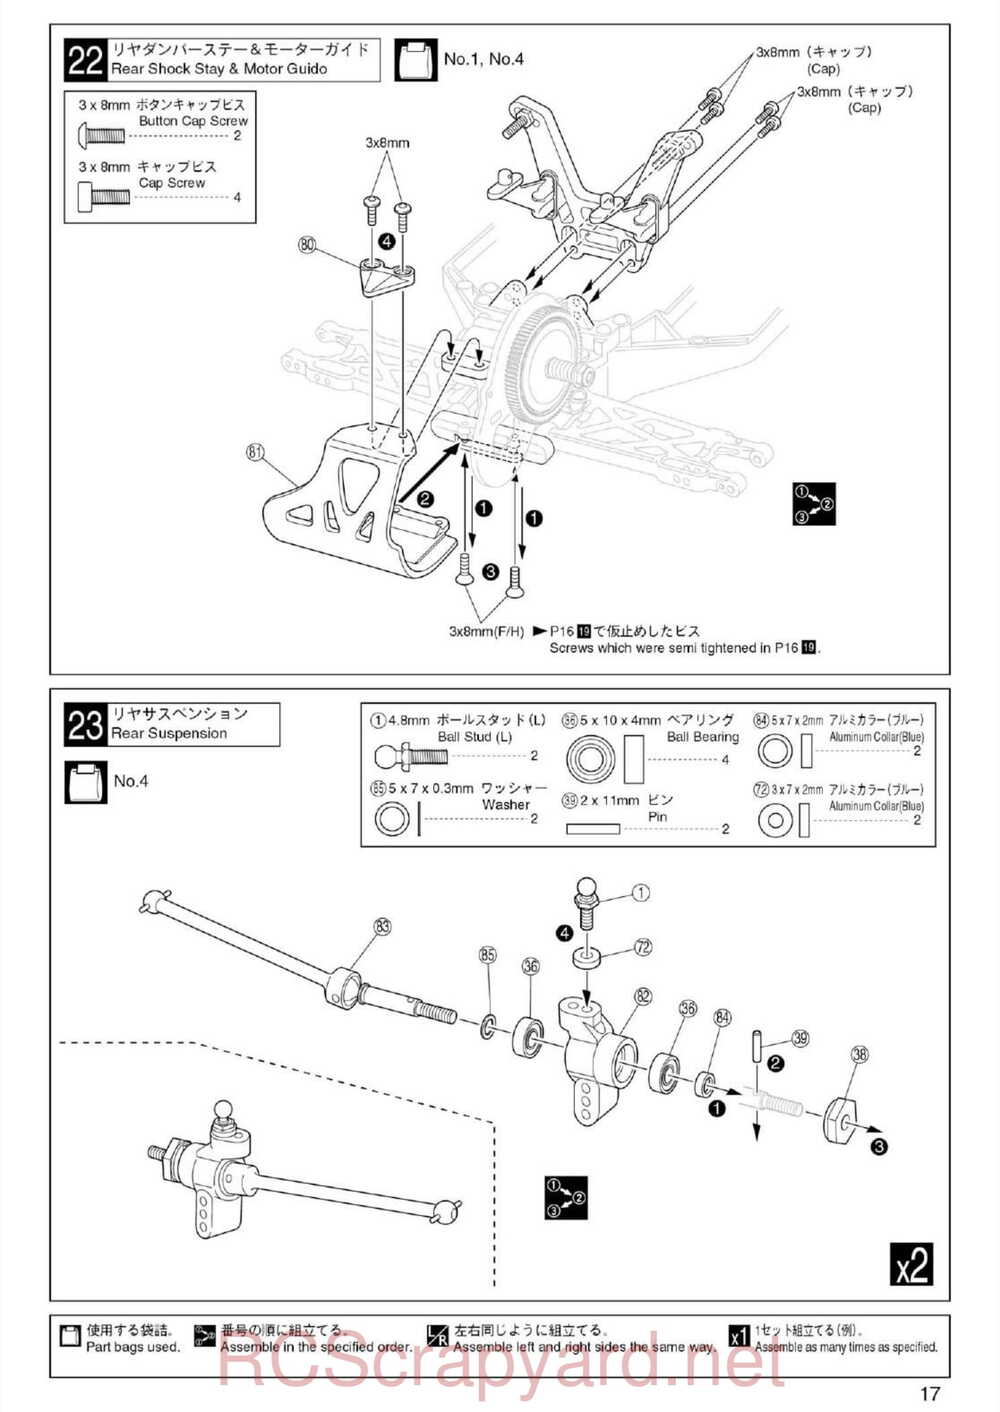 Kyosho - 30074 - Ultima-RB5 - Manual - Page 17